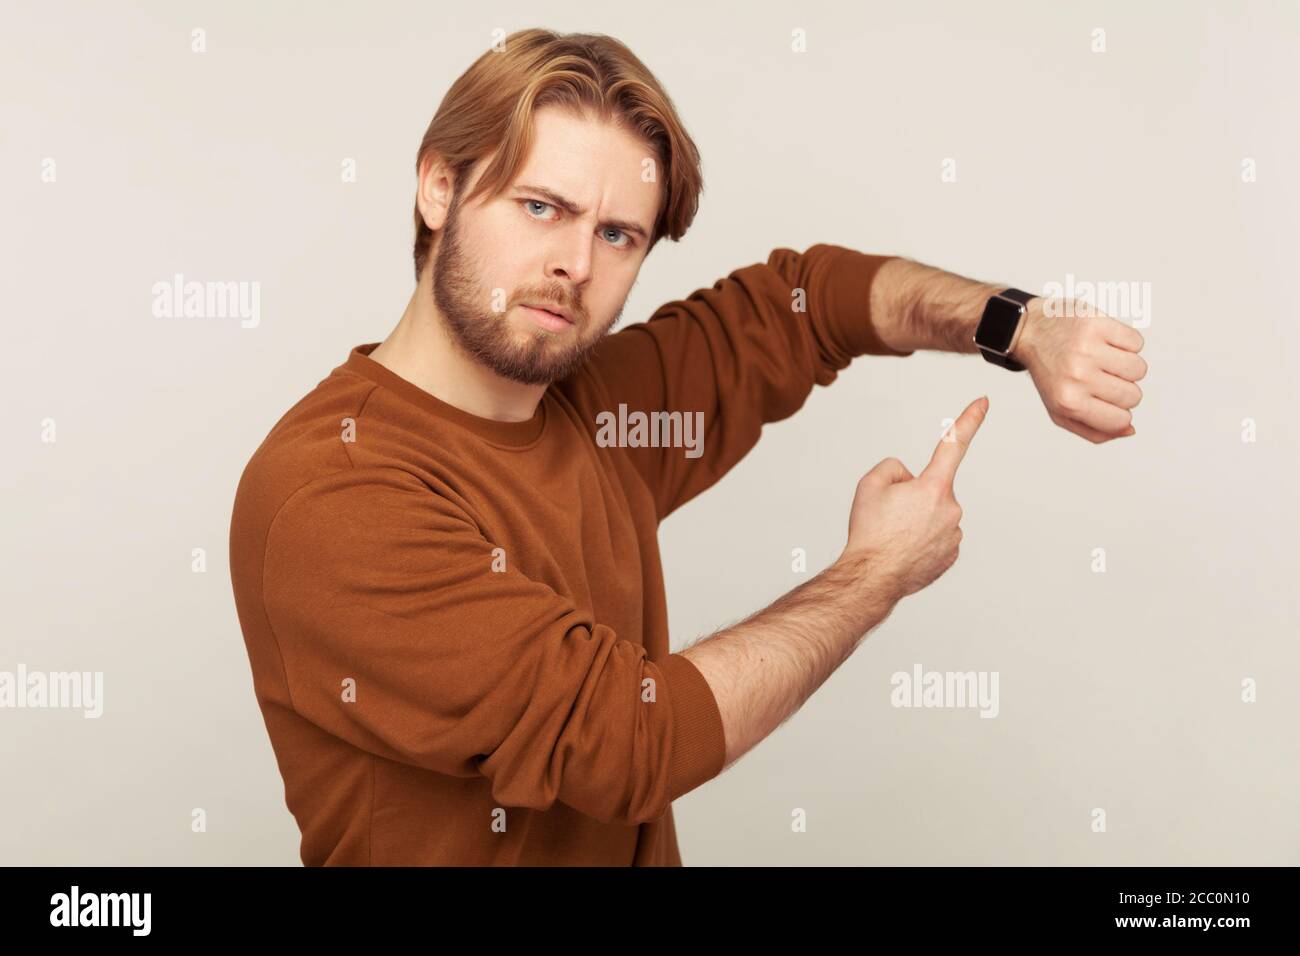 Look at time! Portrait of angry impatient man with beard in sweatshirt pointing wrist watch and looking annoyed displeased, showing clock to hurry up. Stock Photo